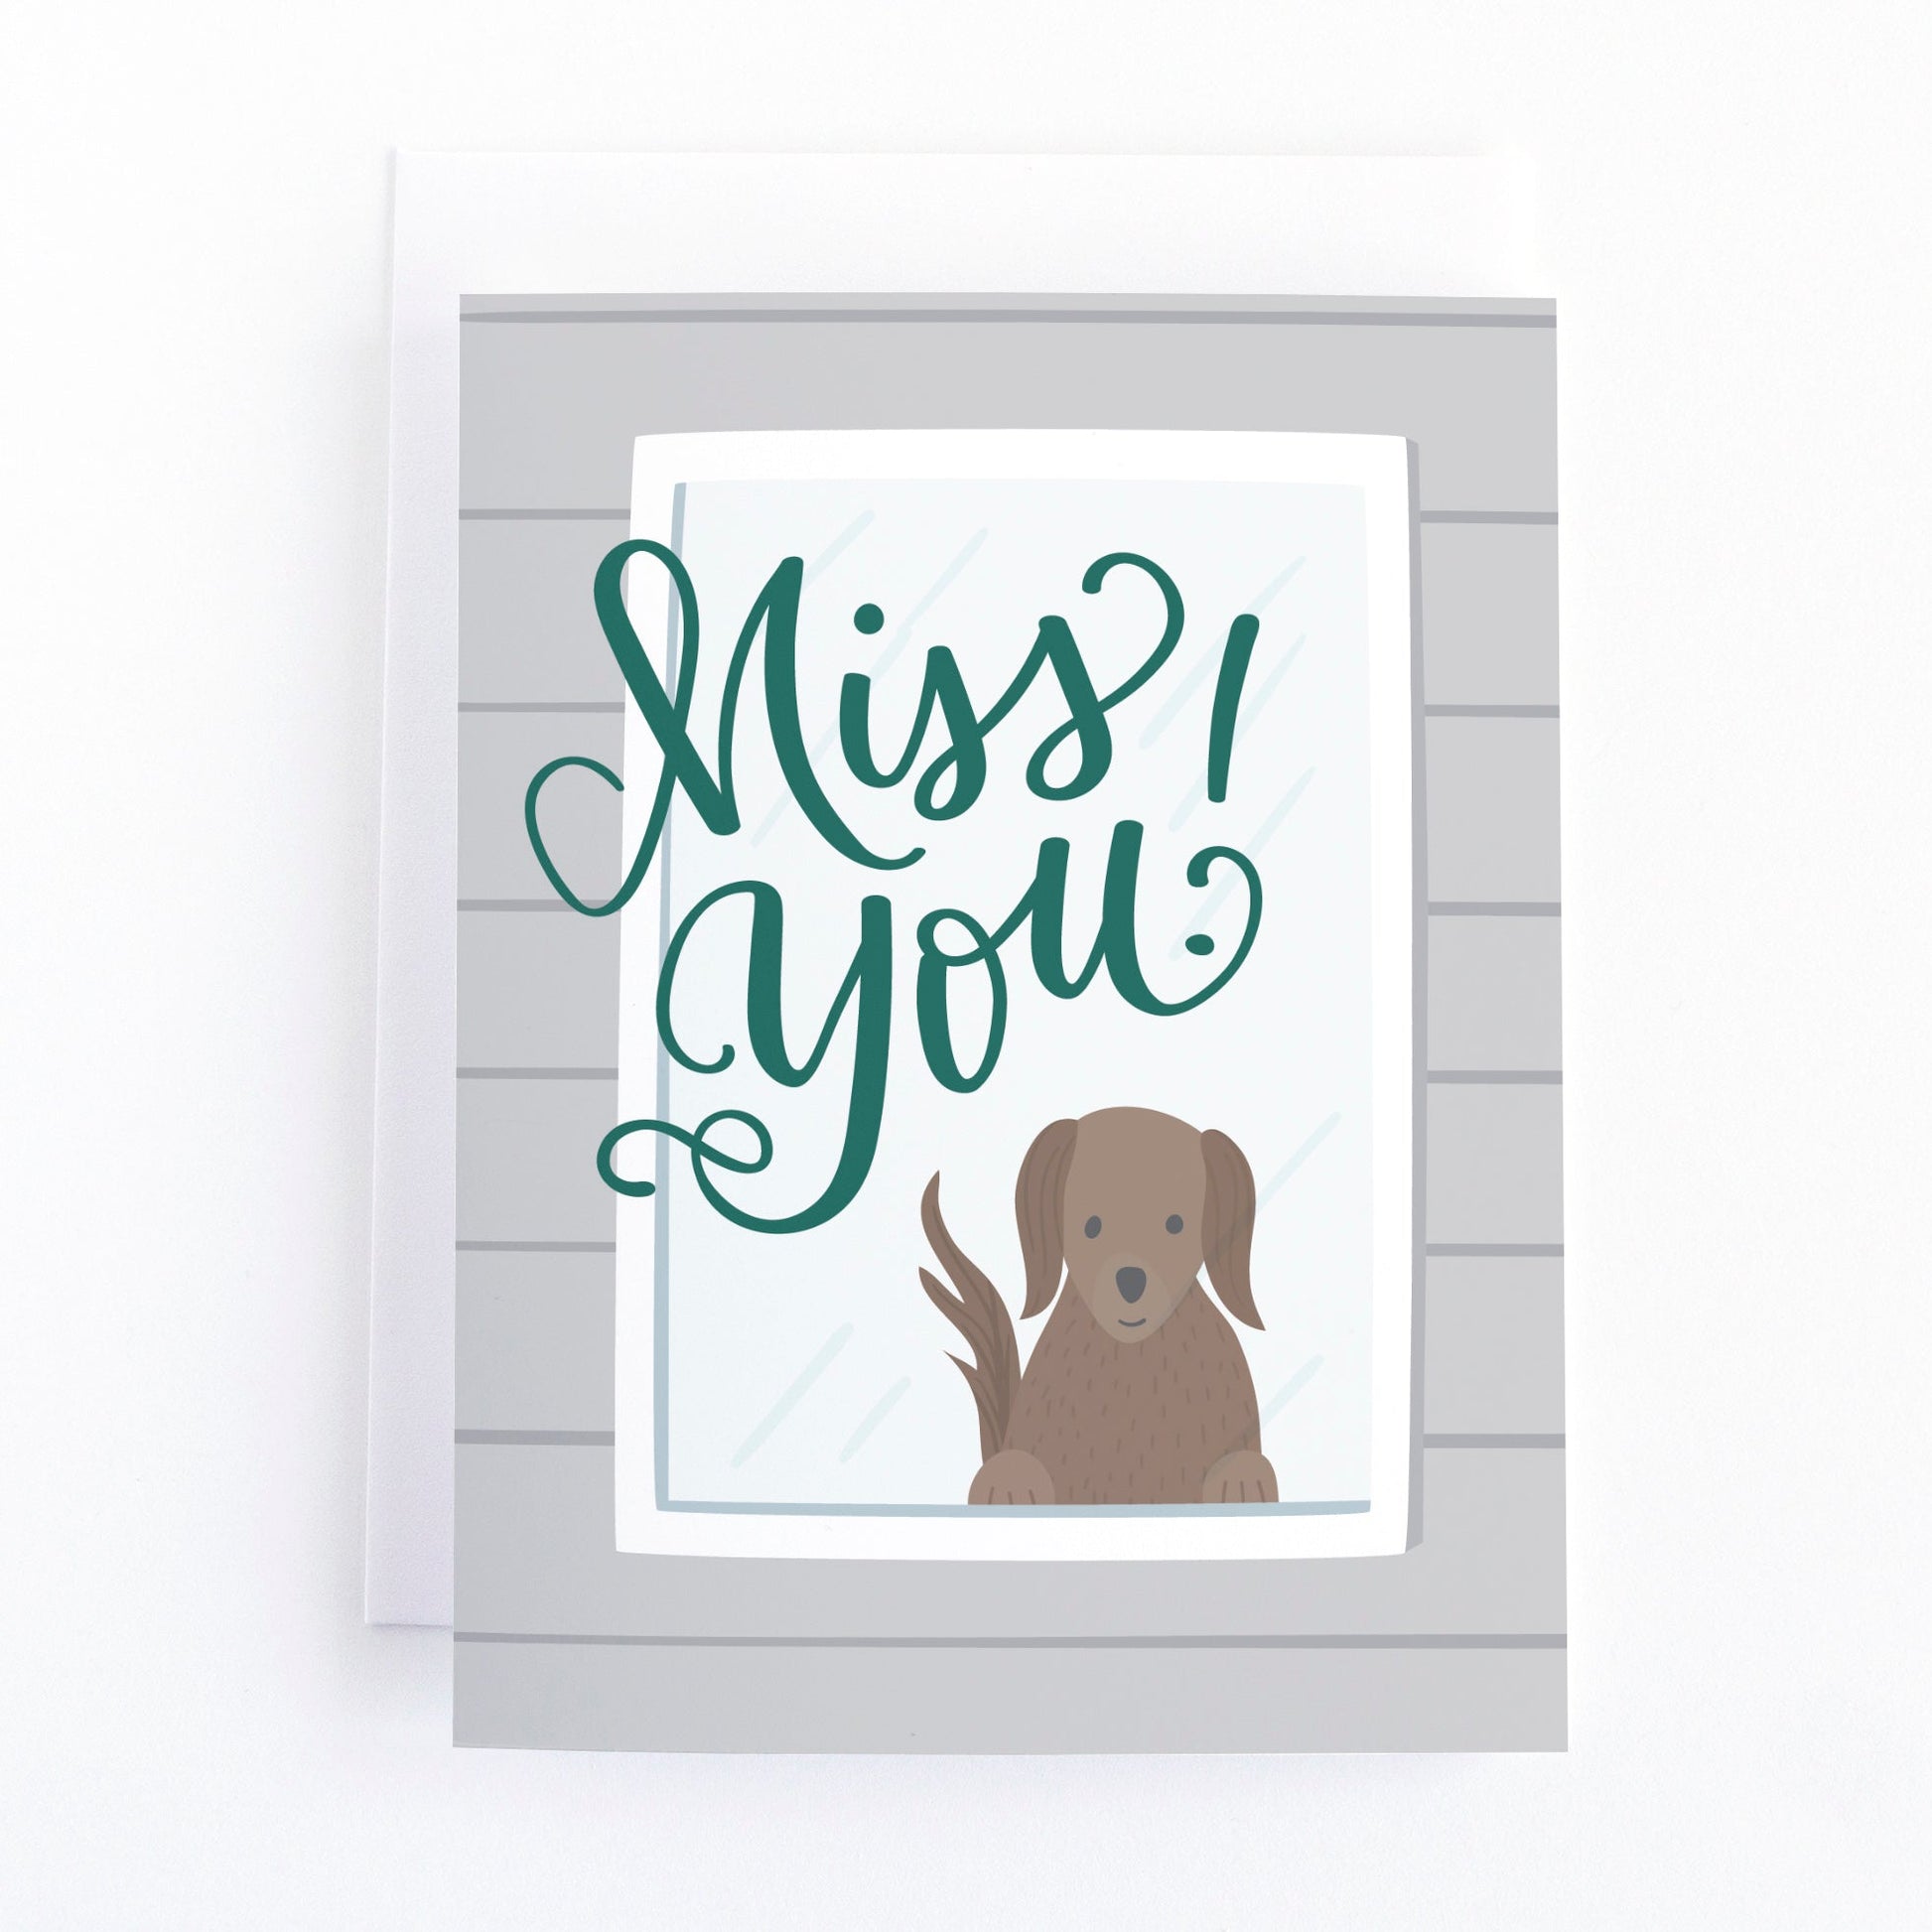 Miss you greeting card with a dog looking out the window and the hand lettered text, Miss you!